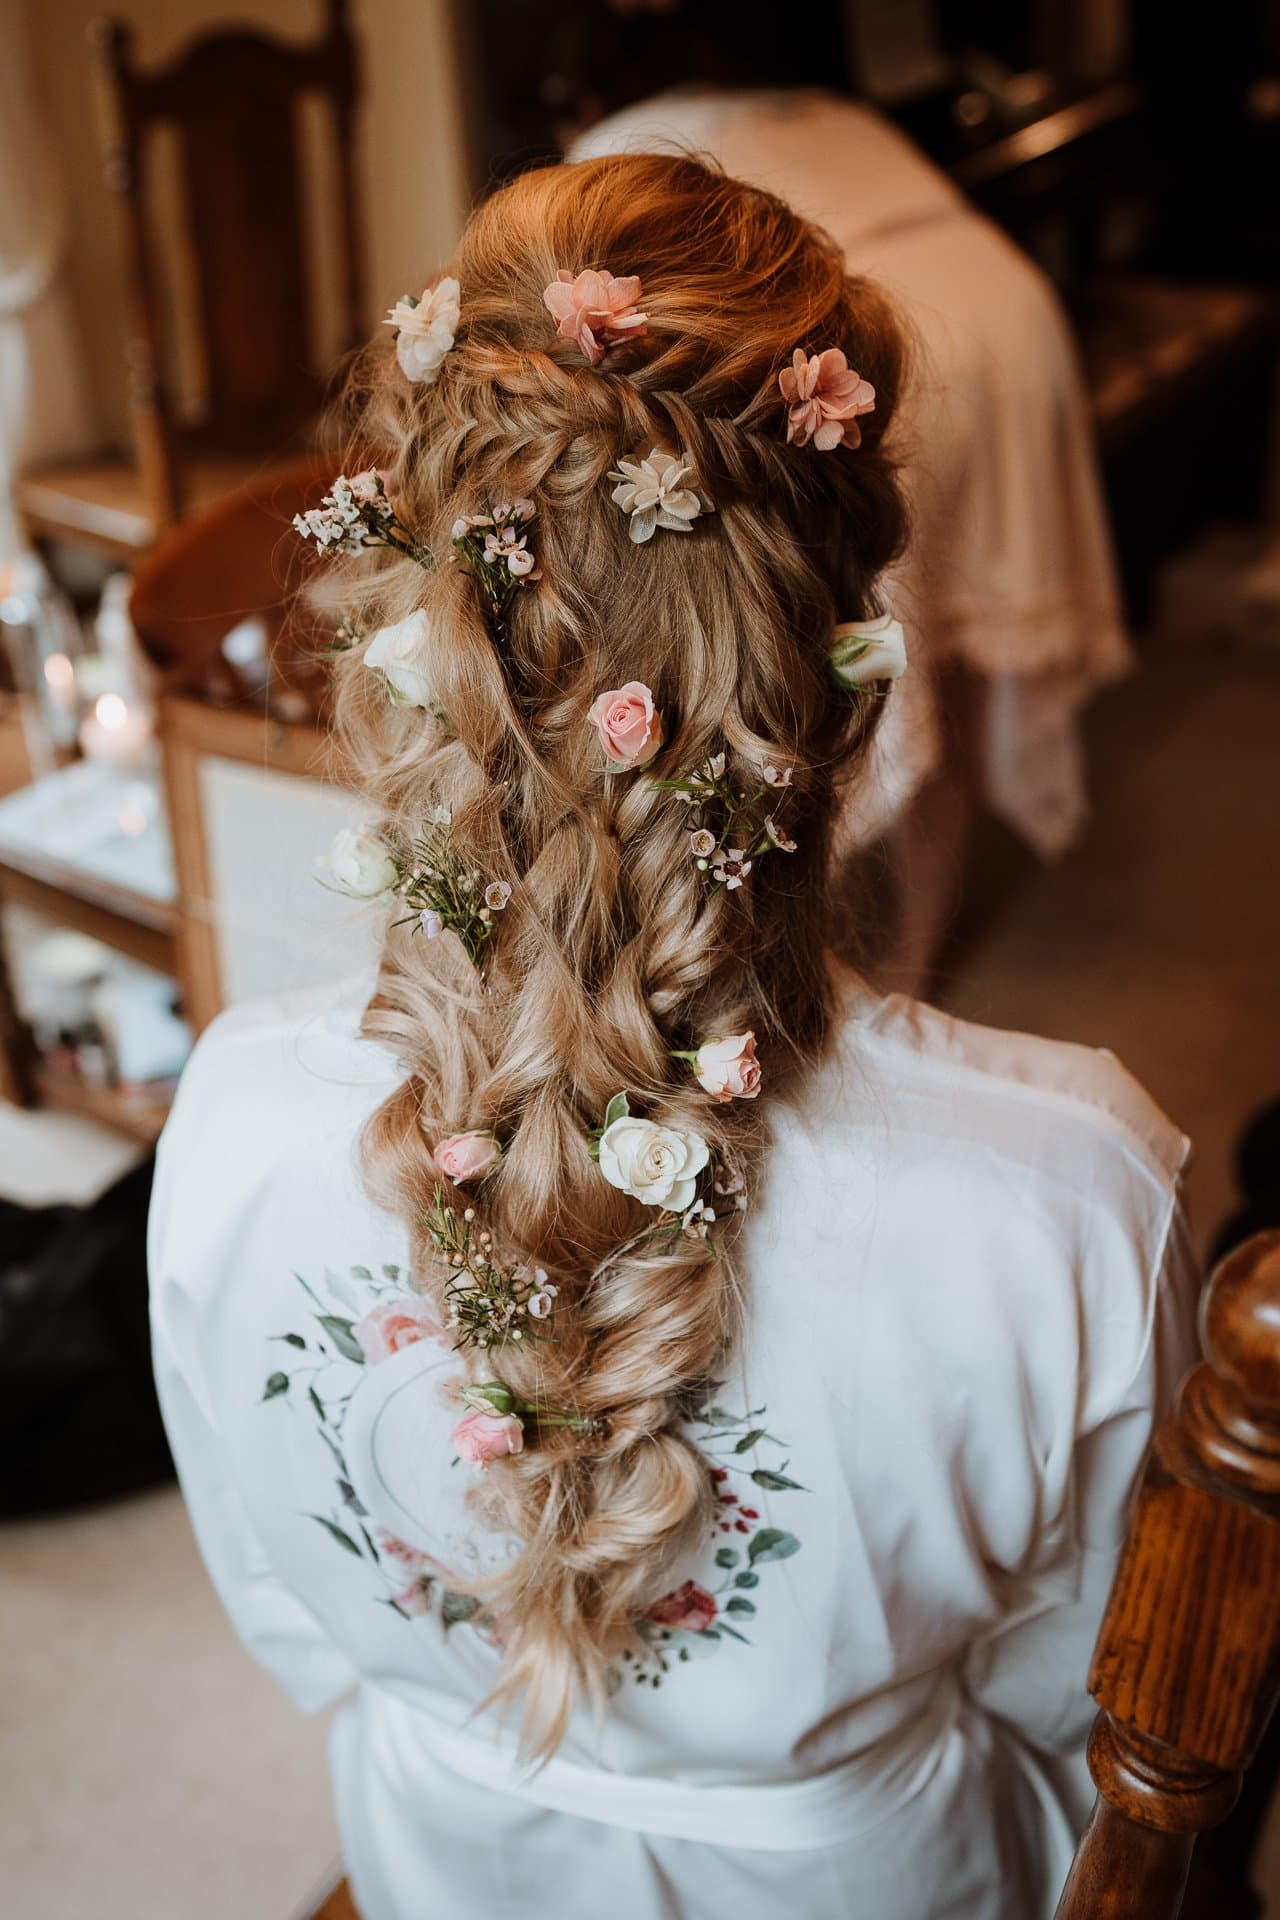 Brides loosely braided hair adorned with pink and white roses